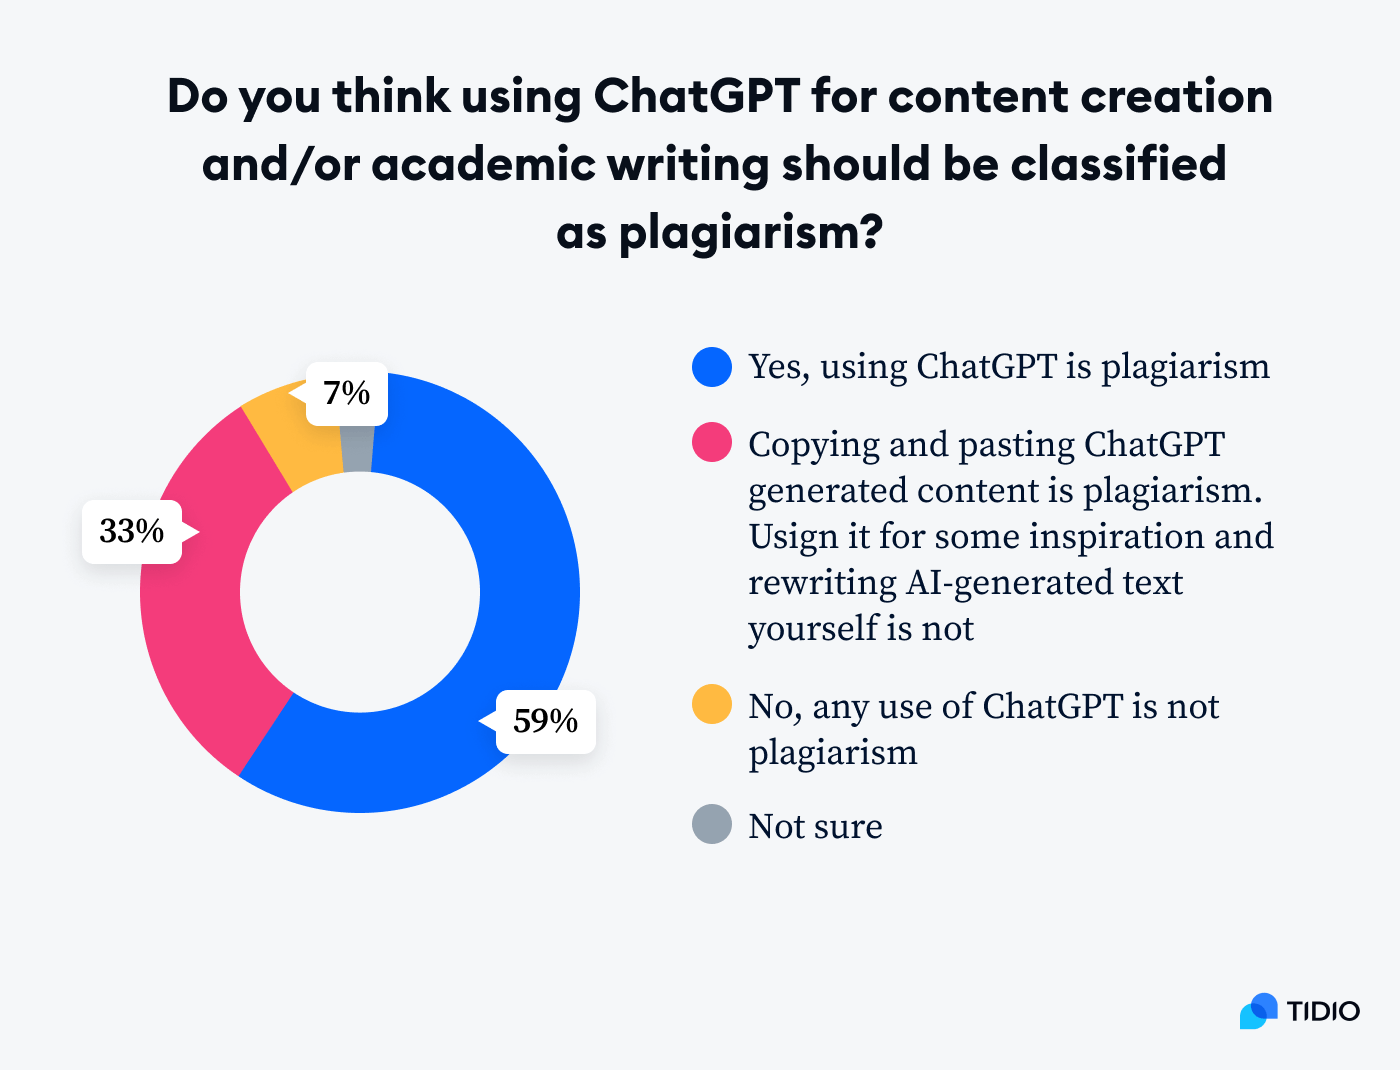 how many people consider using chatGPT for content creation as a plagiarism image